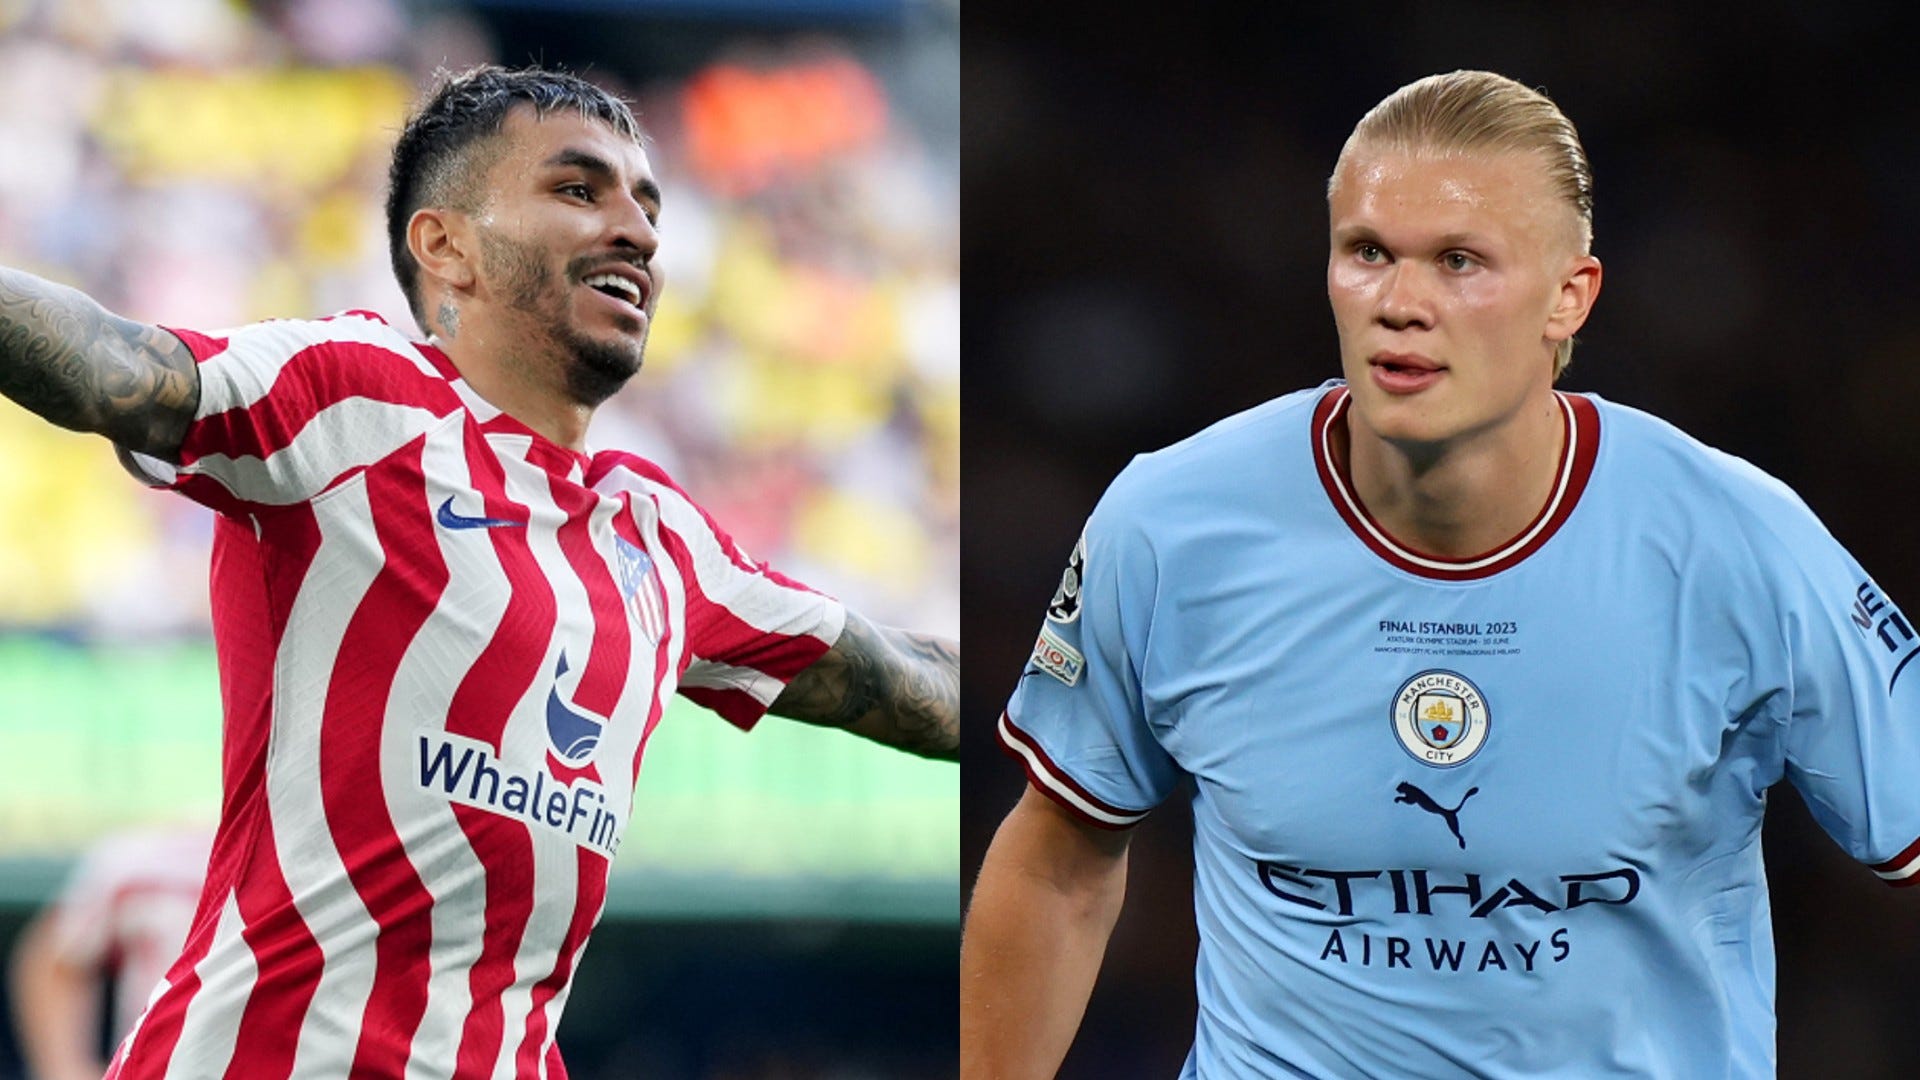 Atlético vs Man City Where to watch the match online, live stream, TV channels, and kick-off time Goal UK